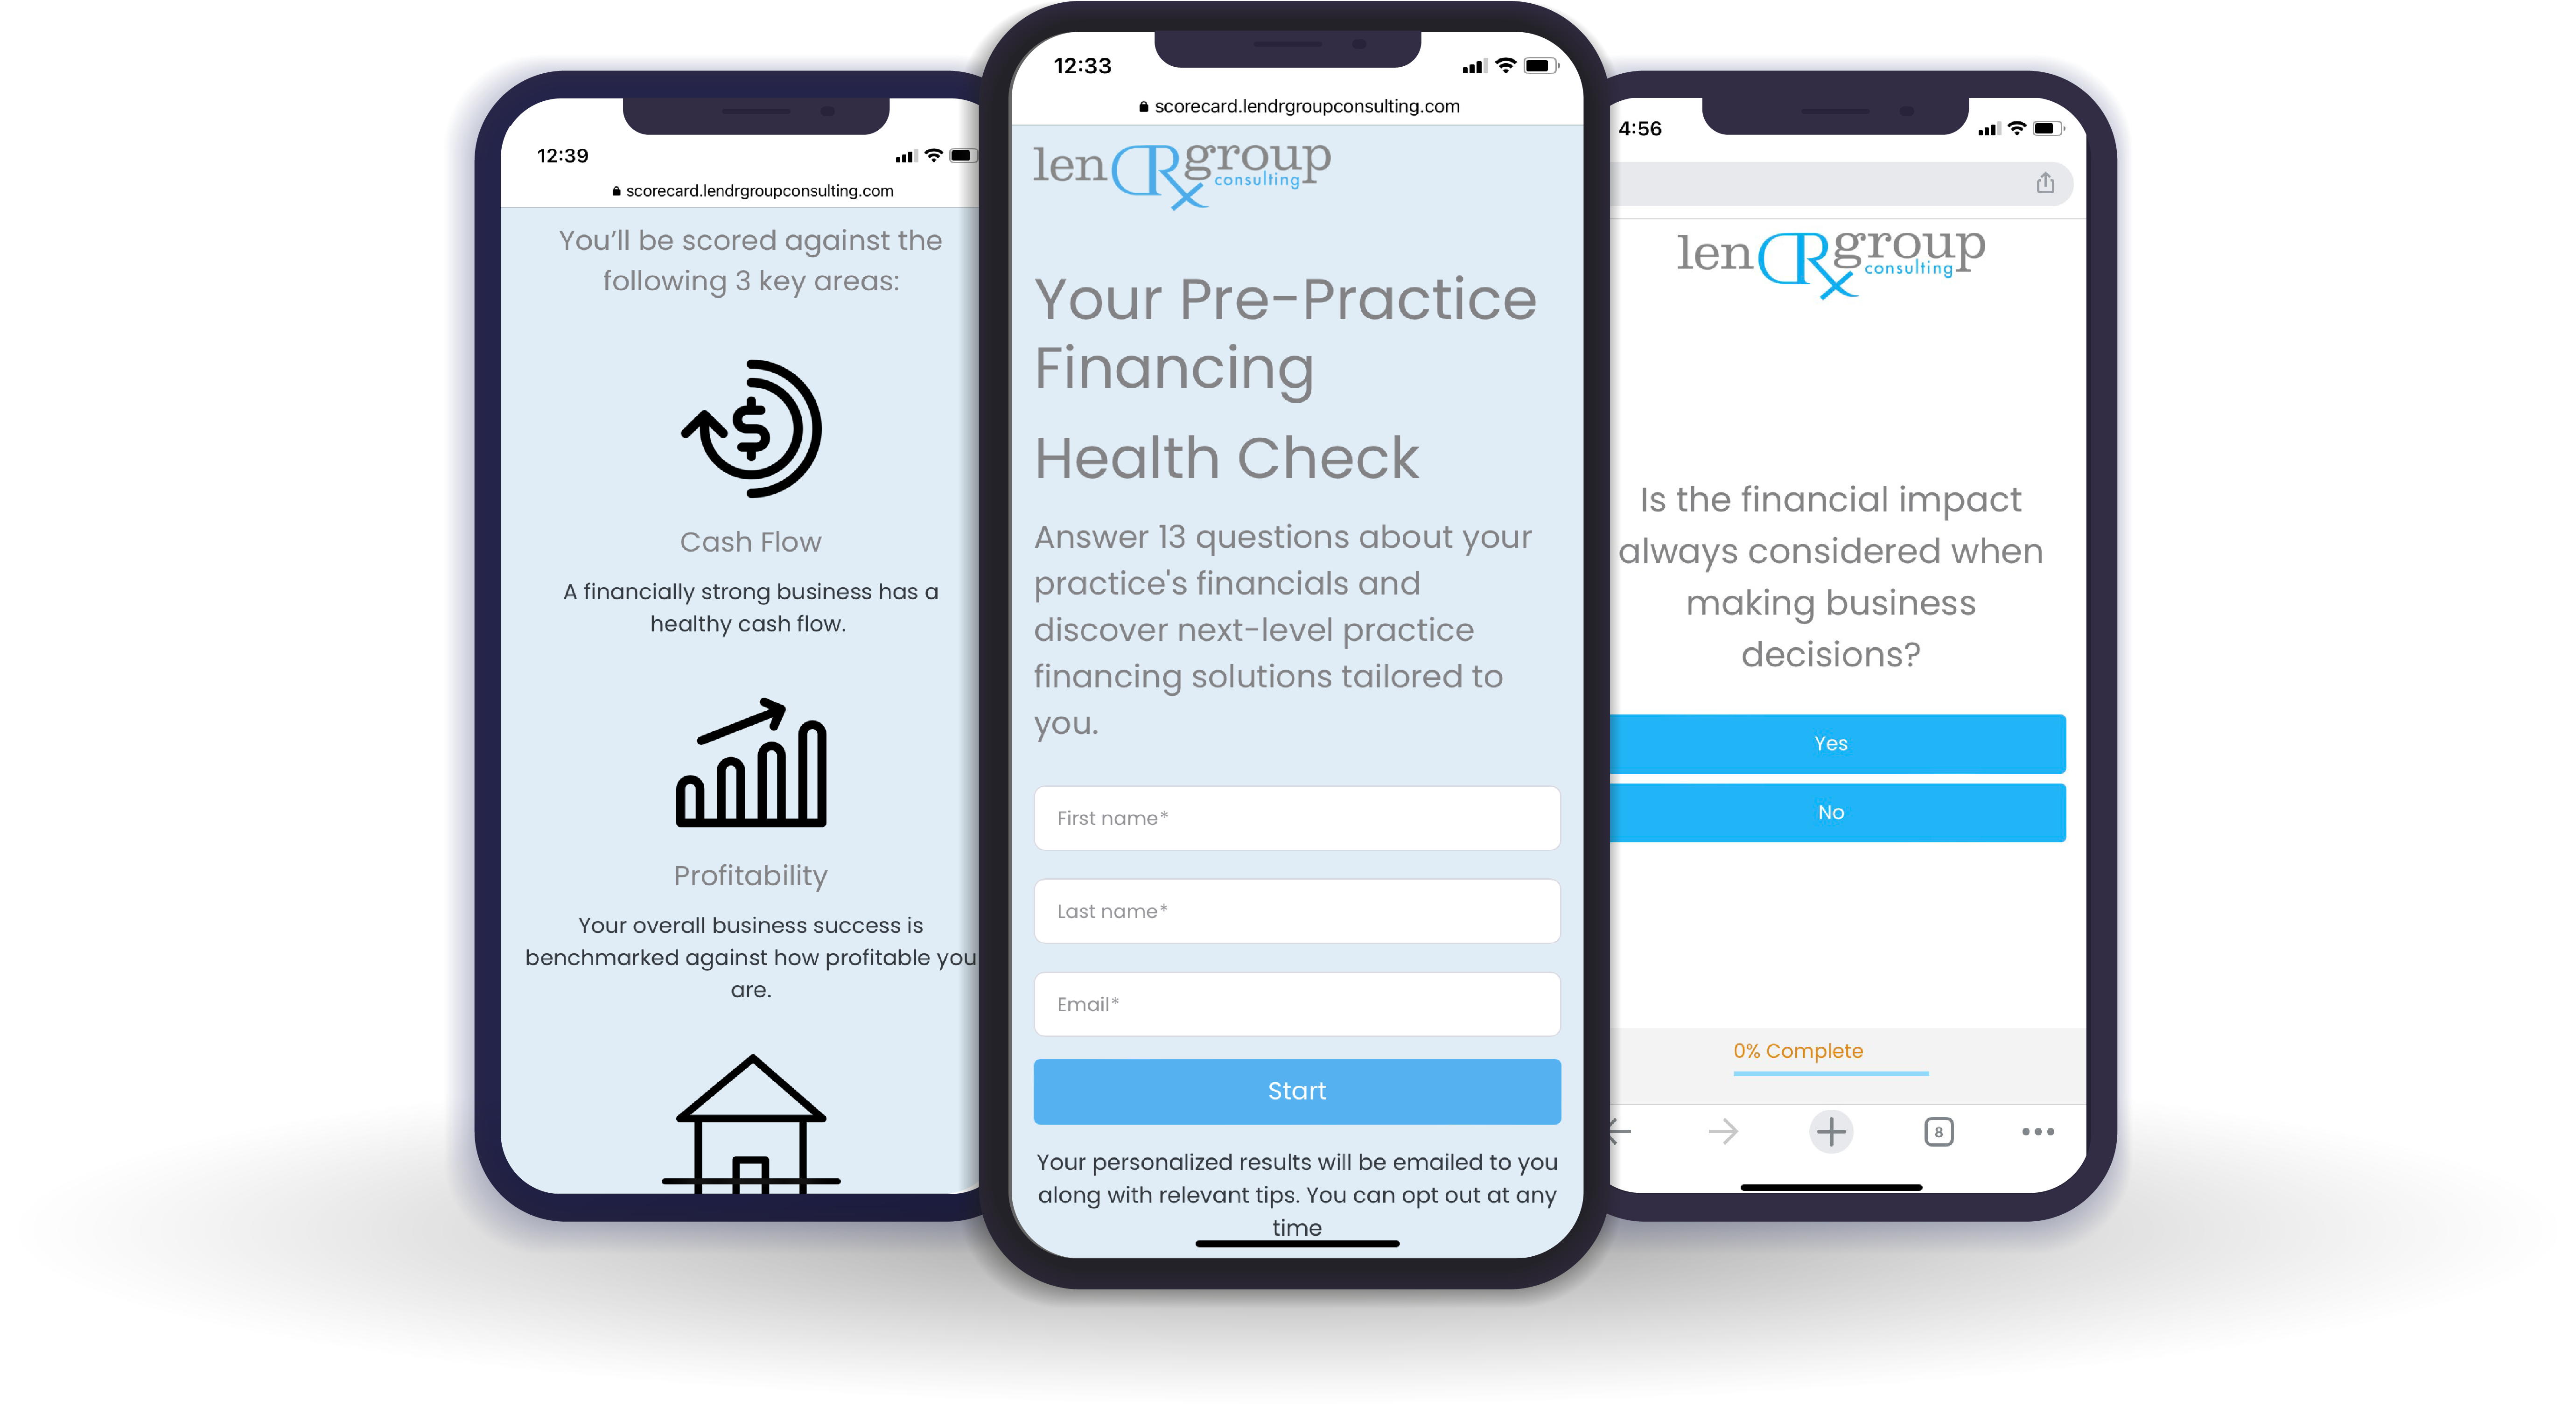 Practice Finance Health Check | LenDRgroup Consulting